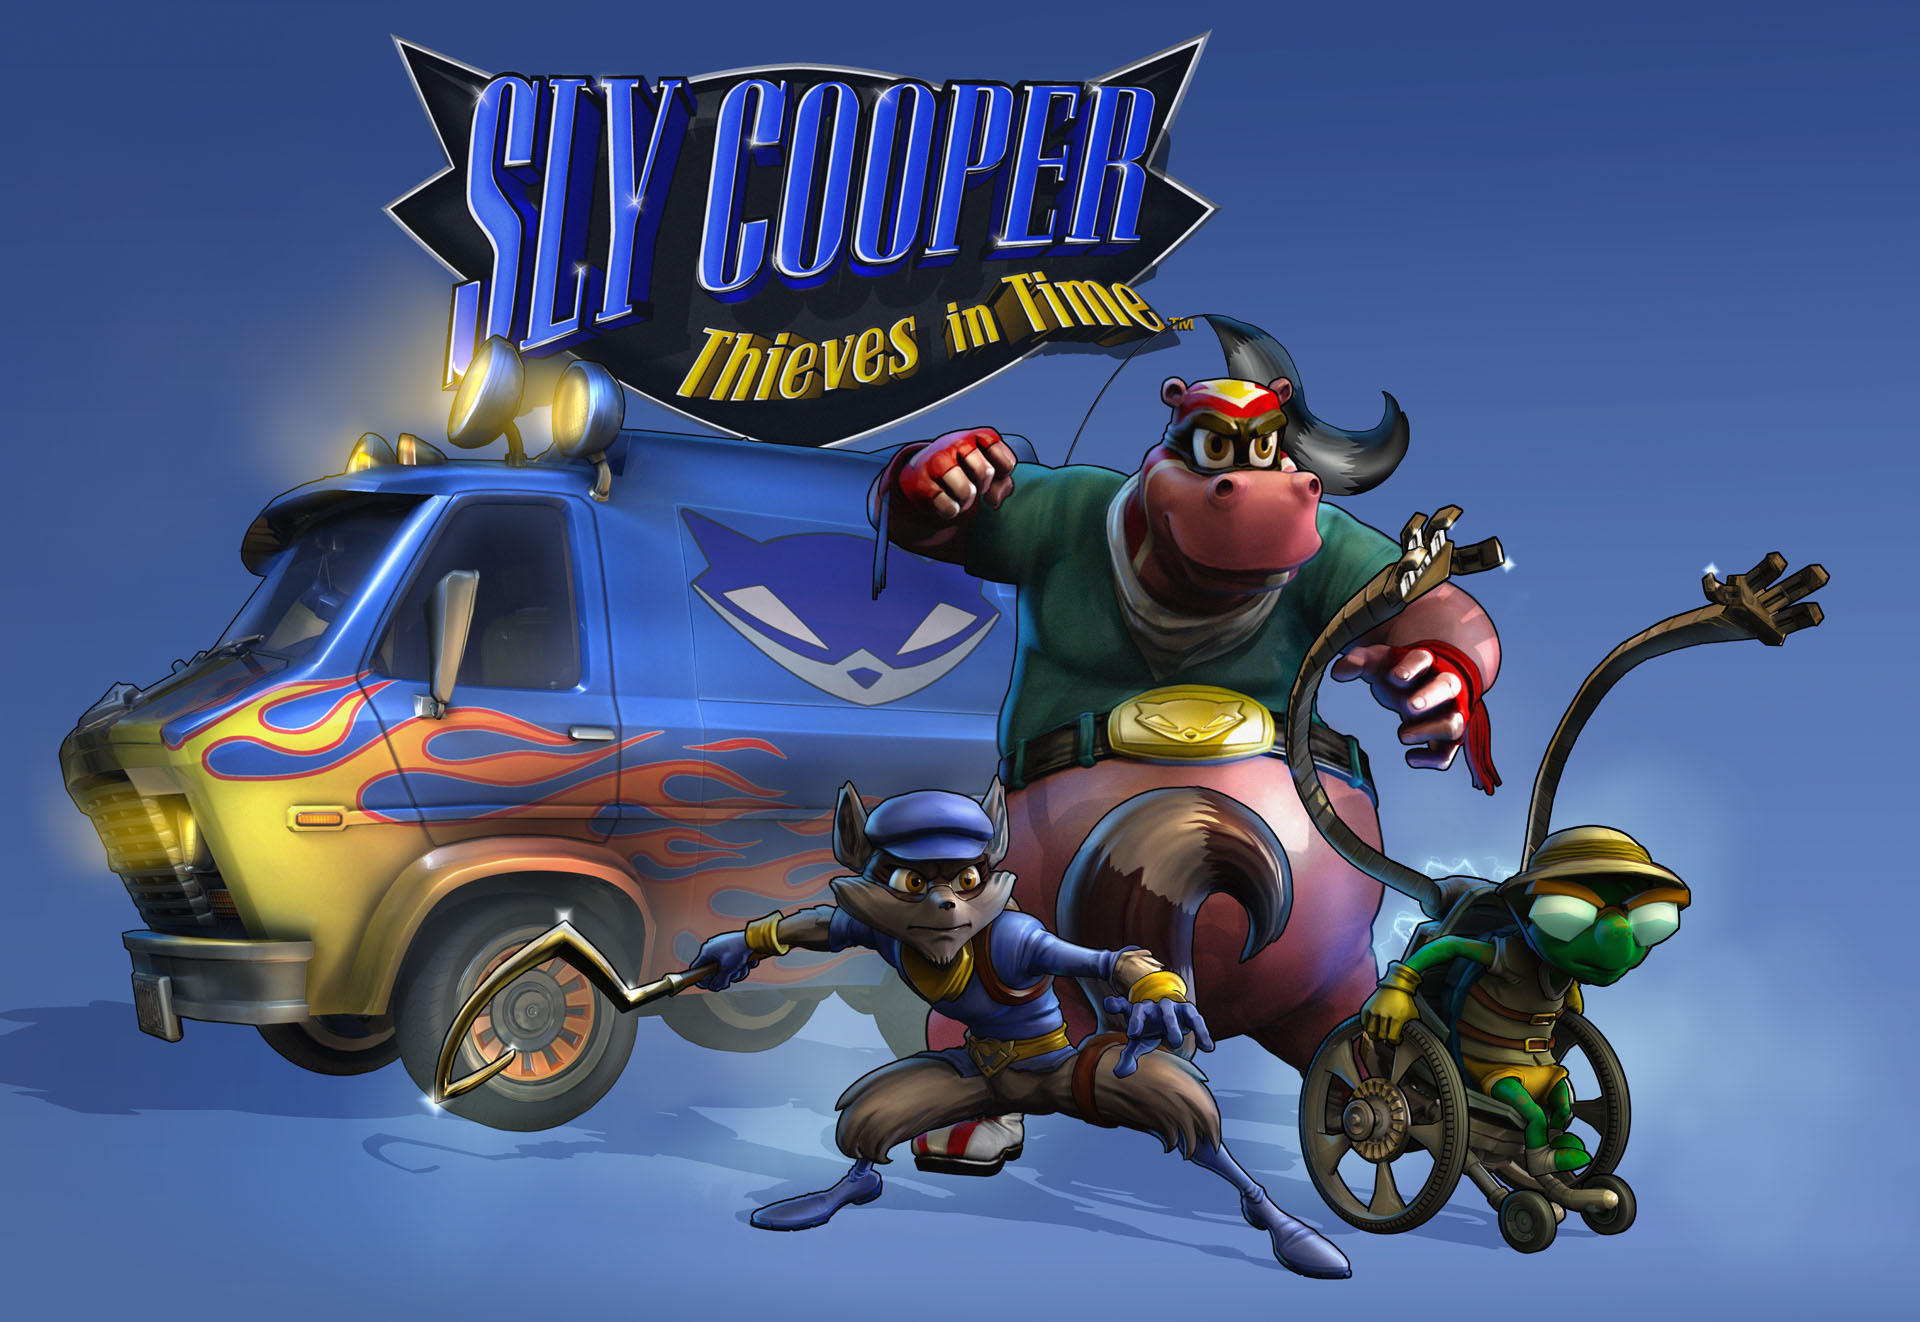 sly cooper 4 ps3